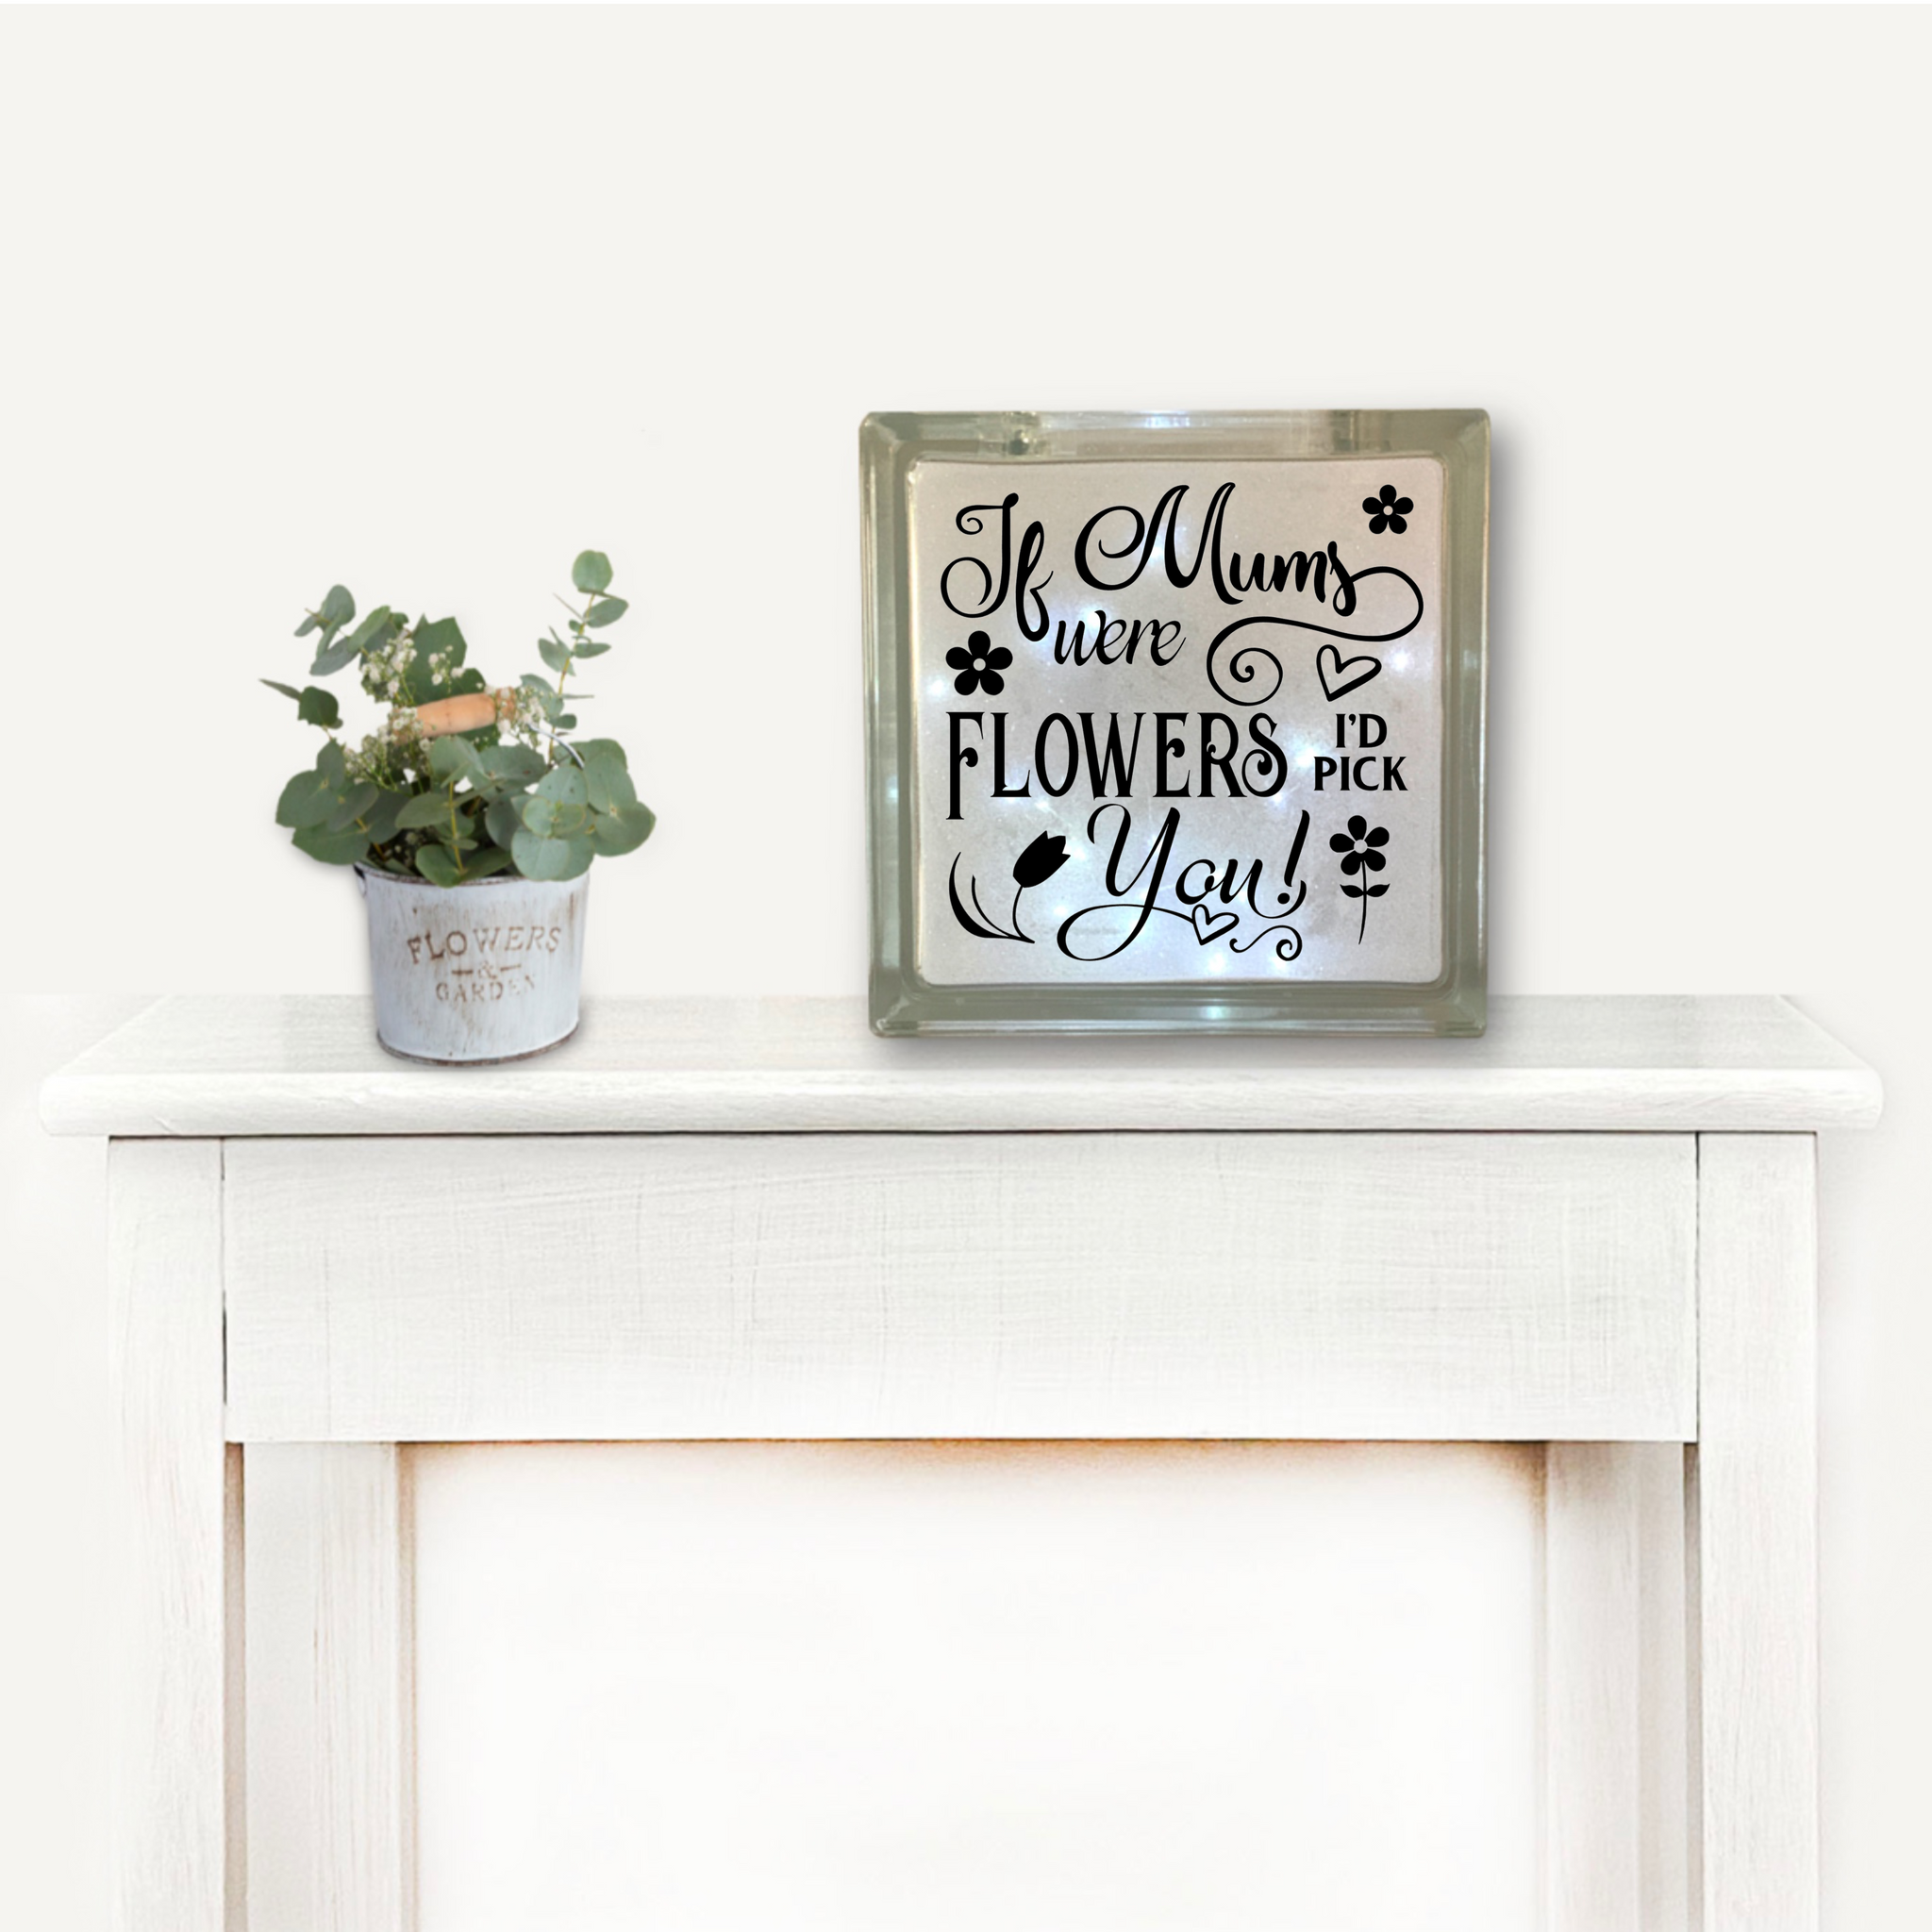 If Mums were flowers, I'd pick you  | Die Cut Vinyl Sticker For Glass Block